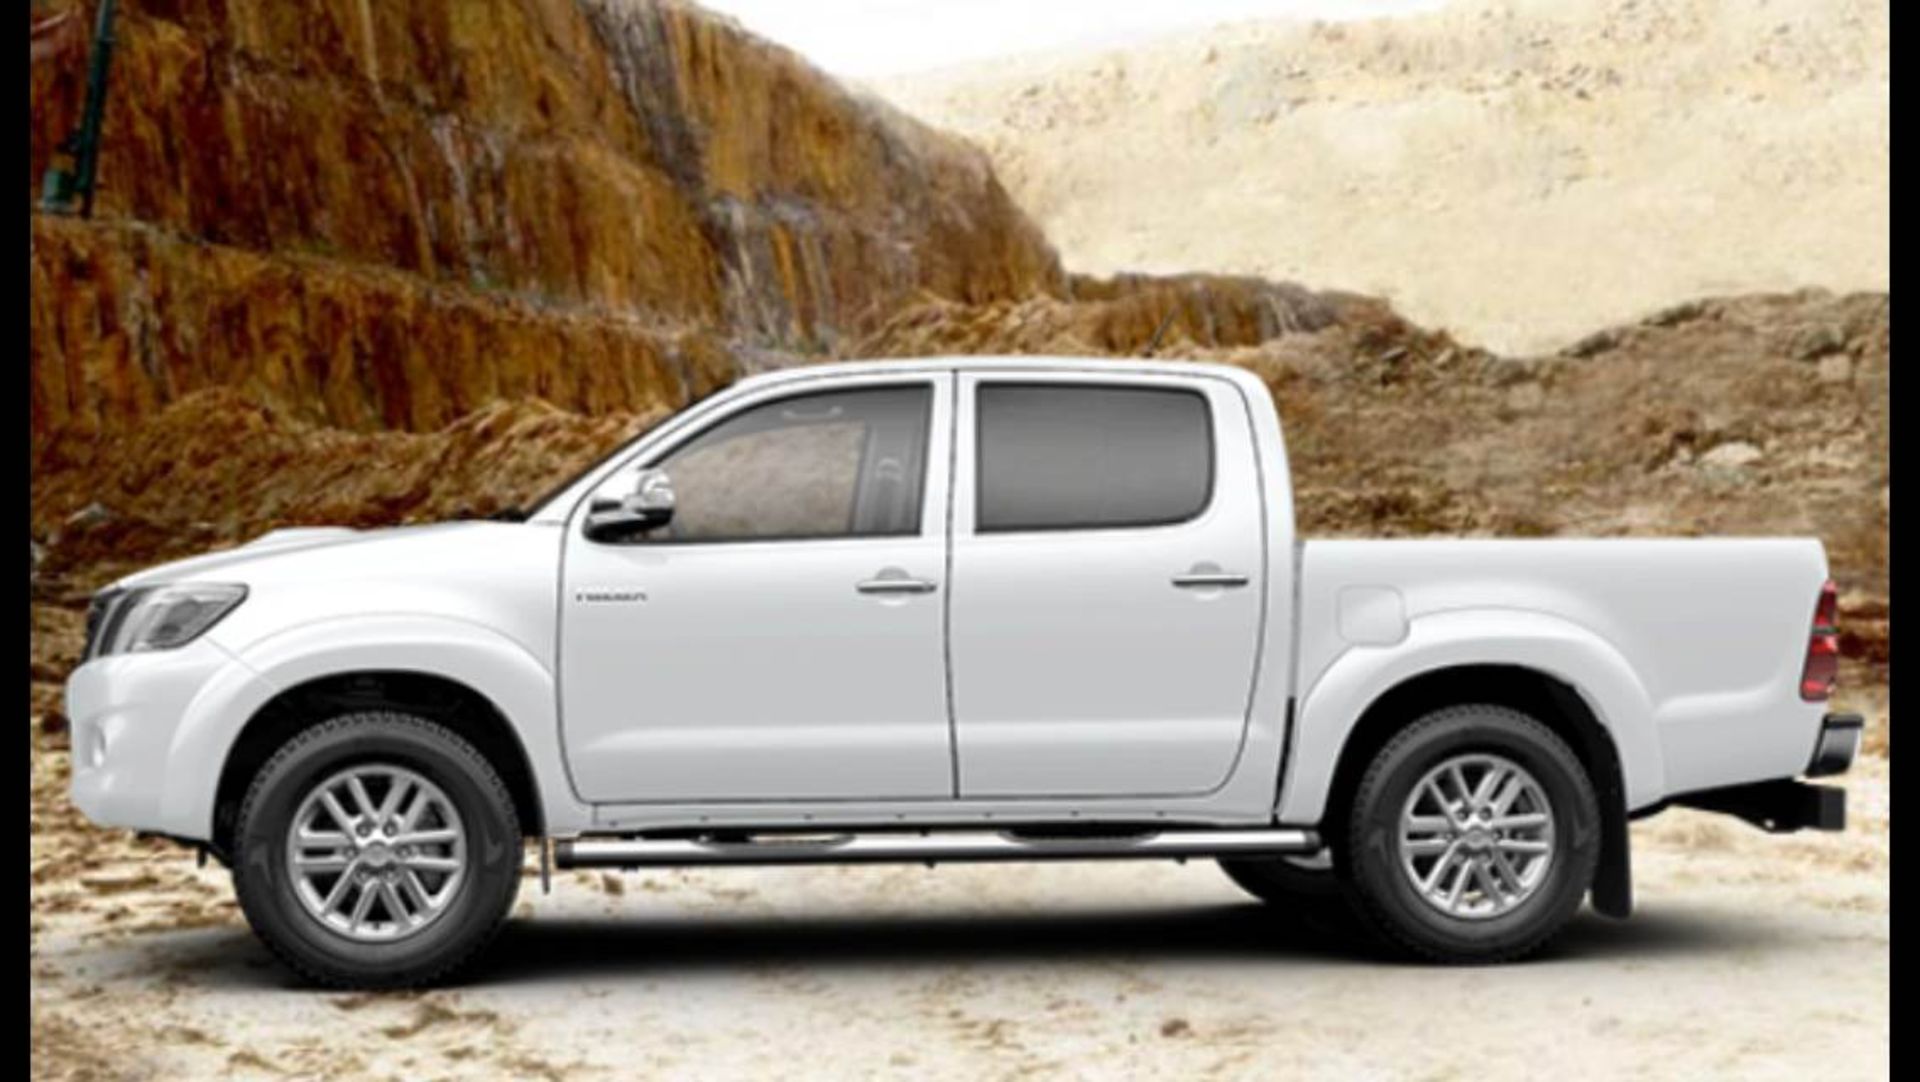 2015/15 REG BRAND NEW TOYOTA HILUX INVINCIBLE 3.0 D-40 DOUBLE CAB - Image 3 of 6